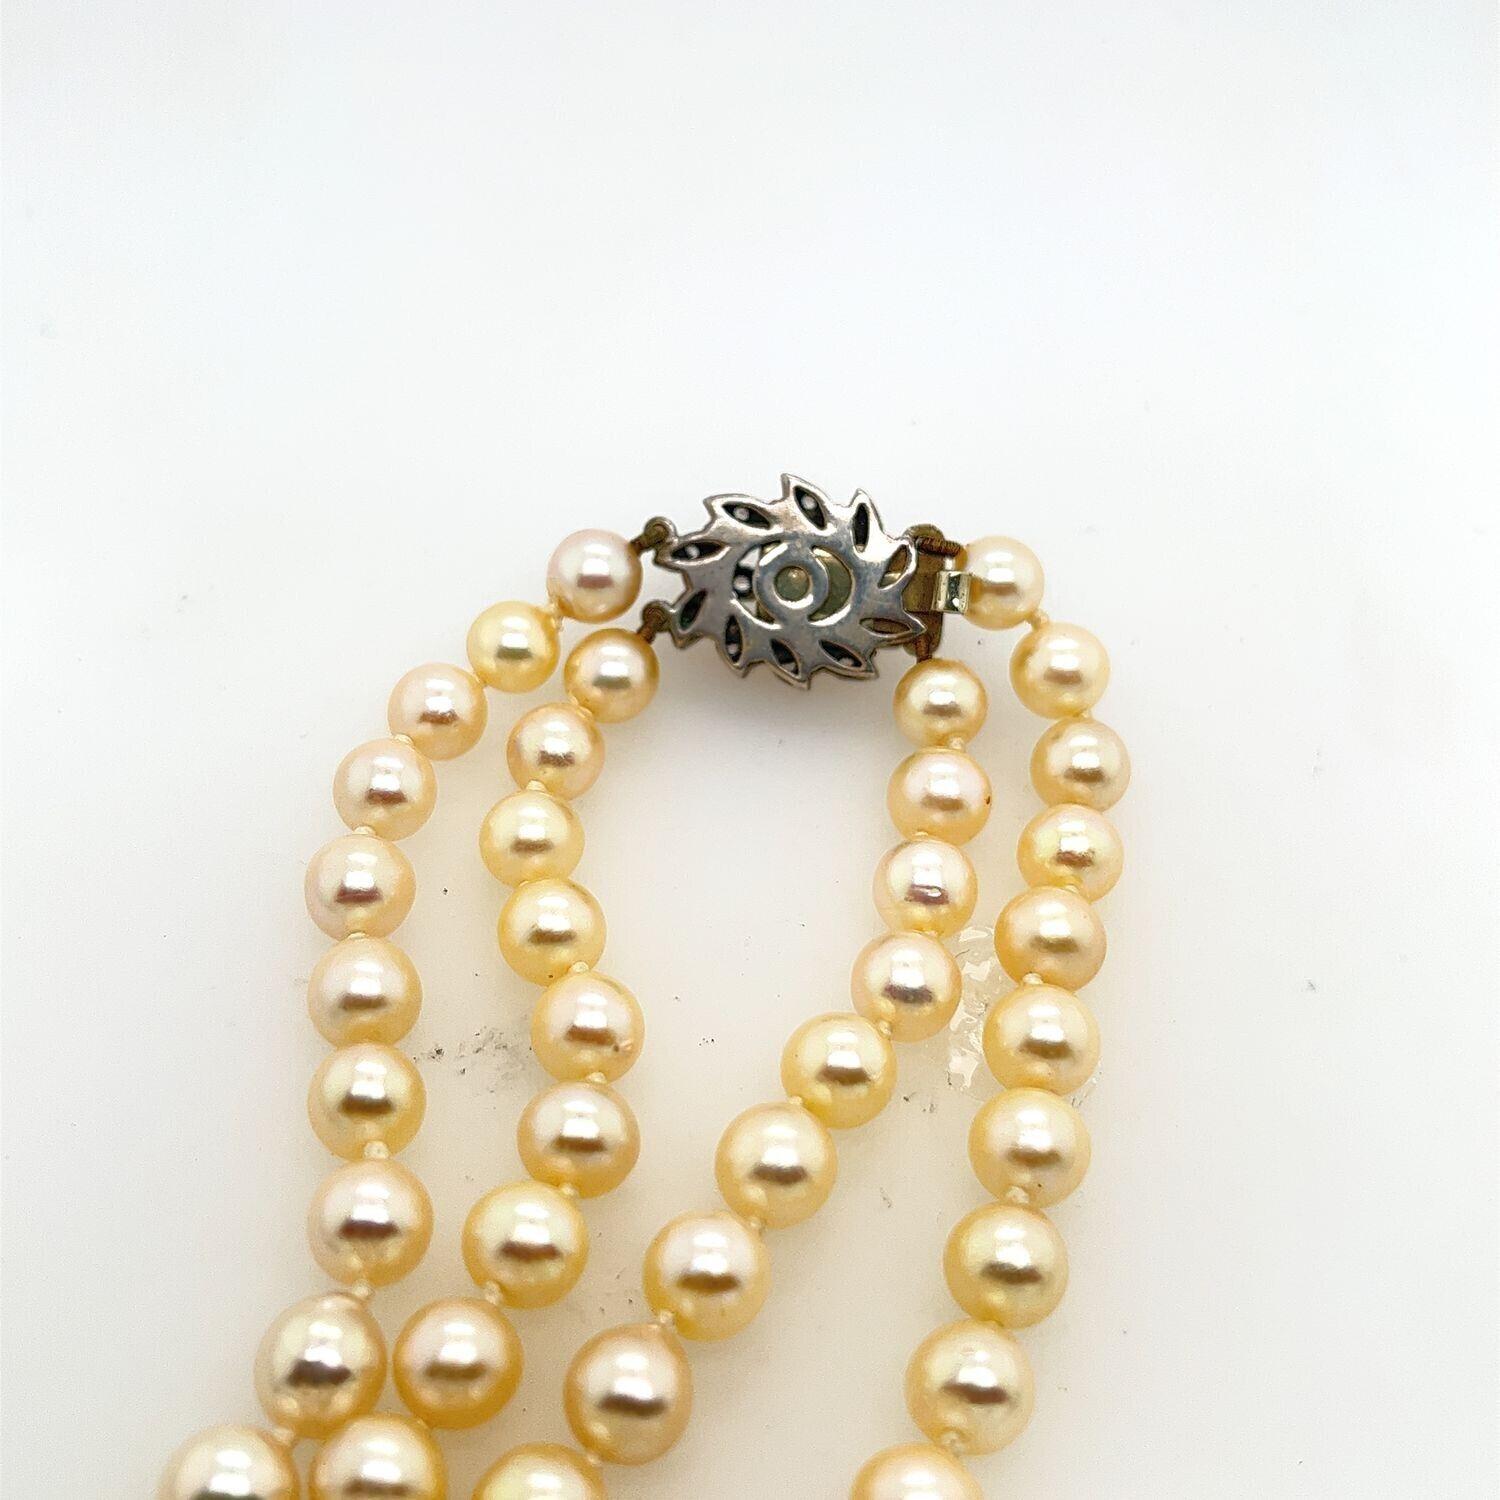 Vintage 2 Row 6.8mm Cultured Pearl Necklace with Silver Clasp In Excellent Condition For Sale In London, GB